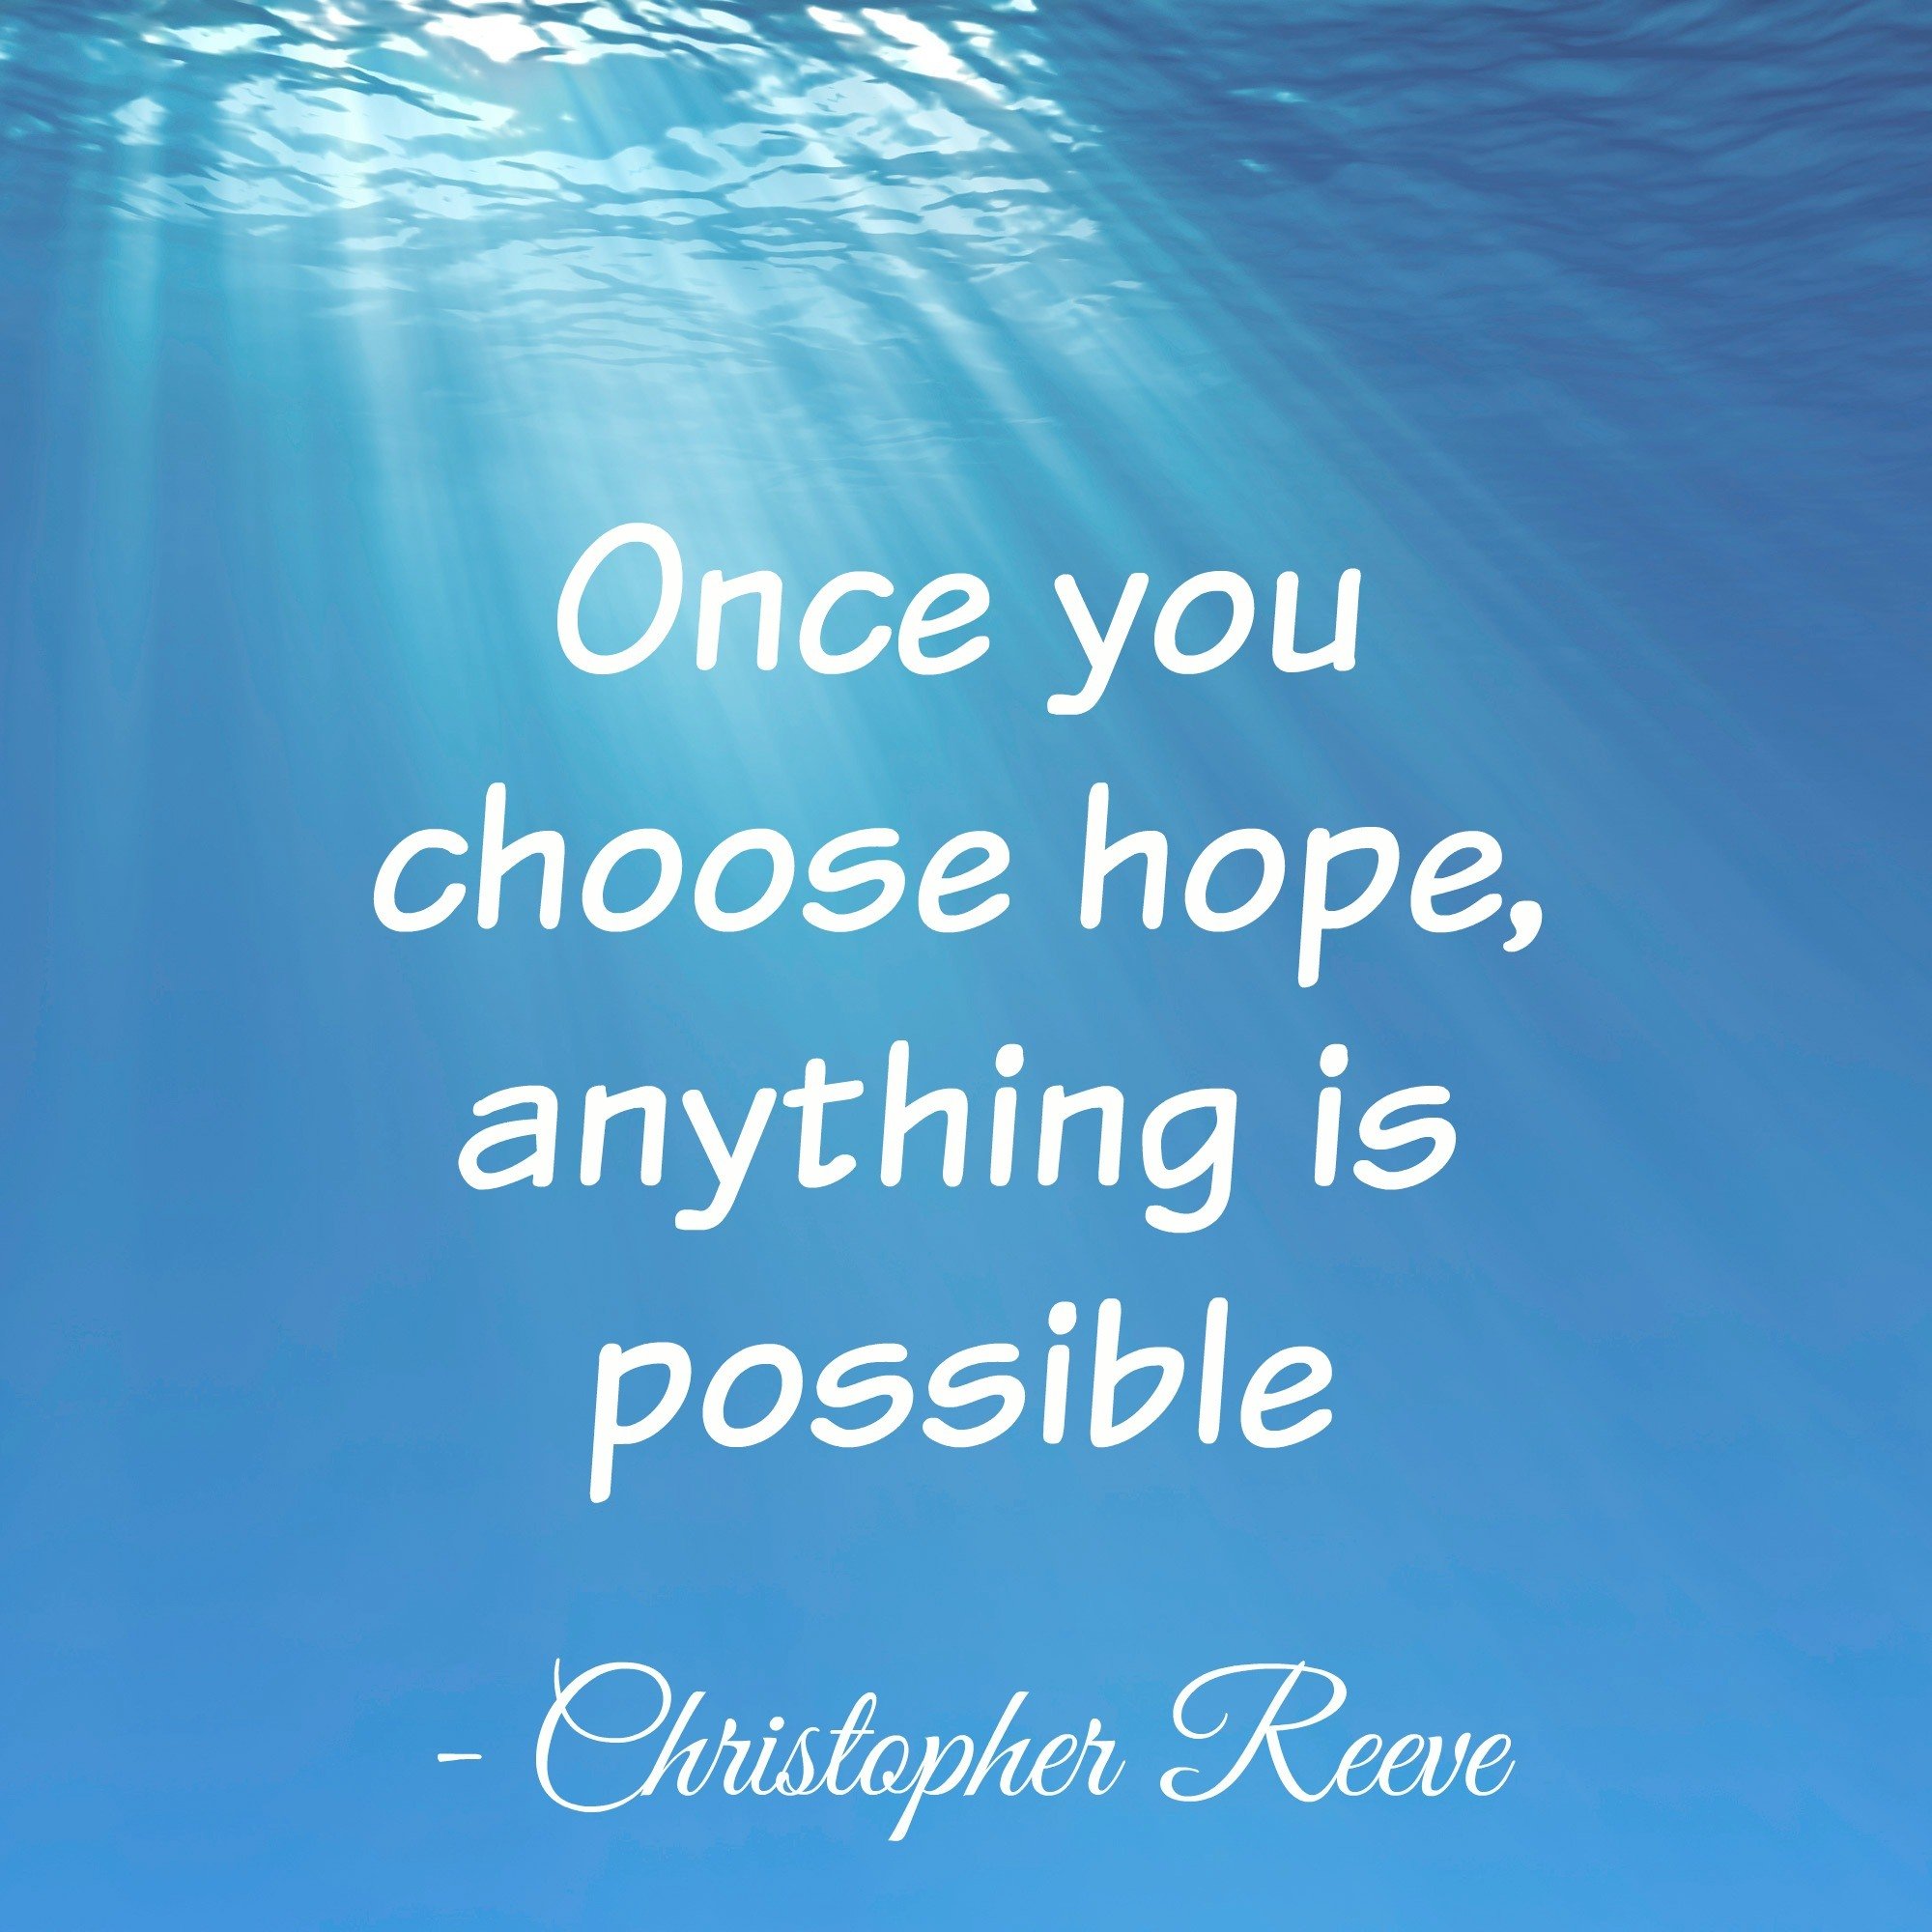 Once you choose hope, anything is possible.